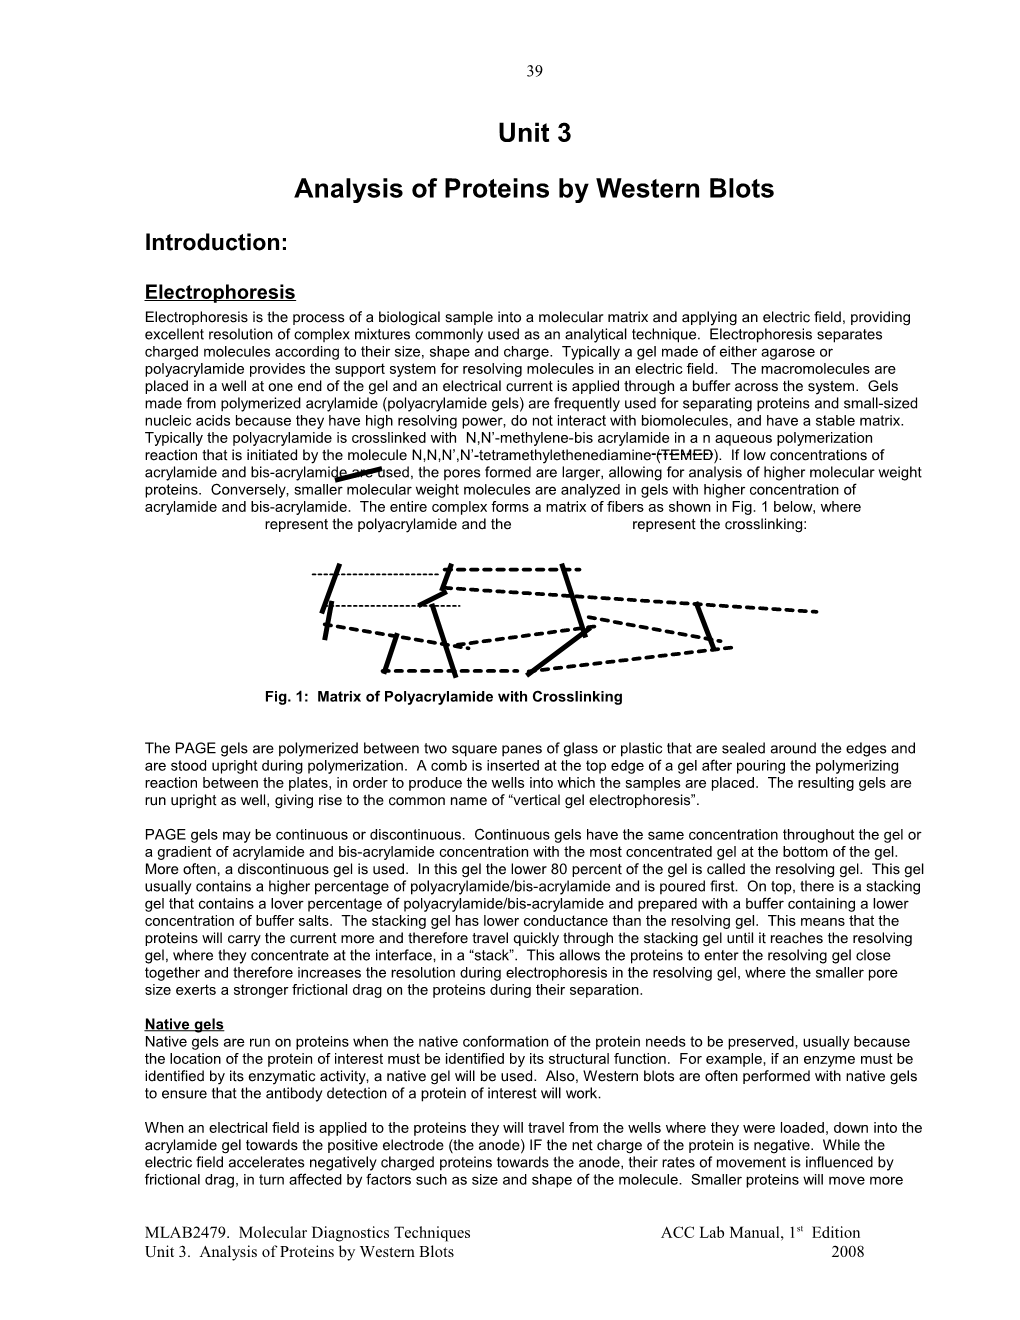 Analysis of Proteins by Western Blots